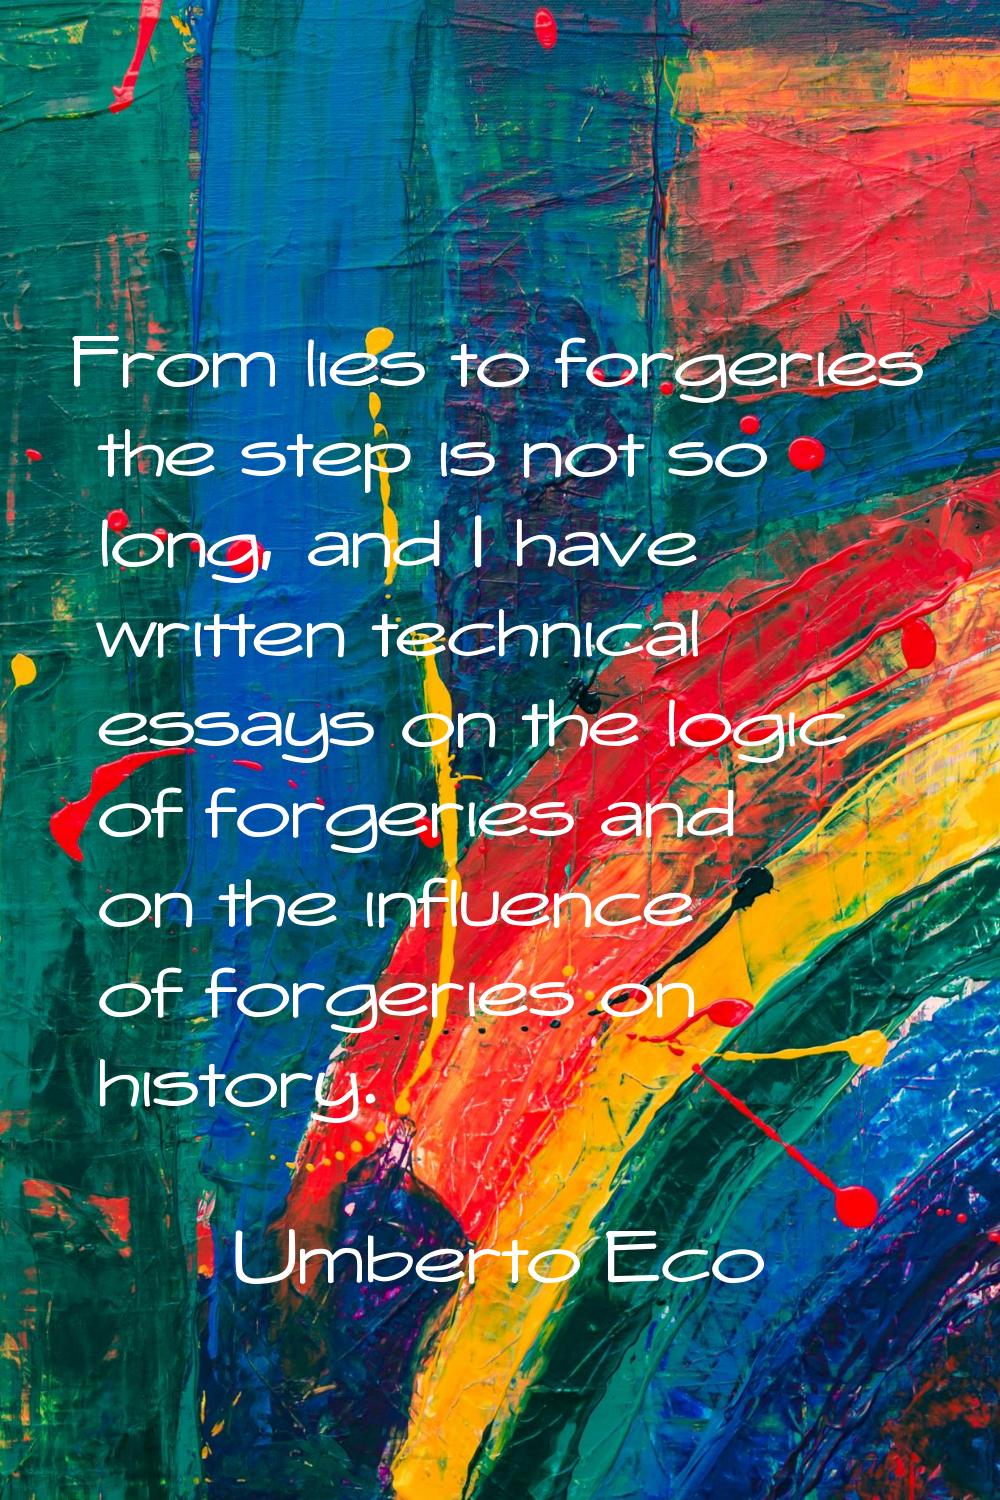 From lies to forgeries the step is not so long, and I have written technical essays on the logic of